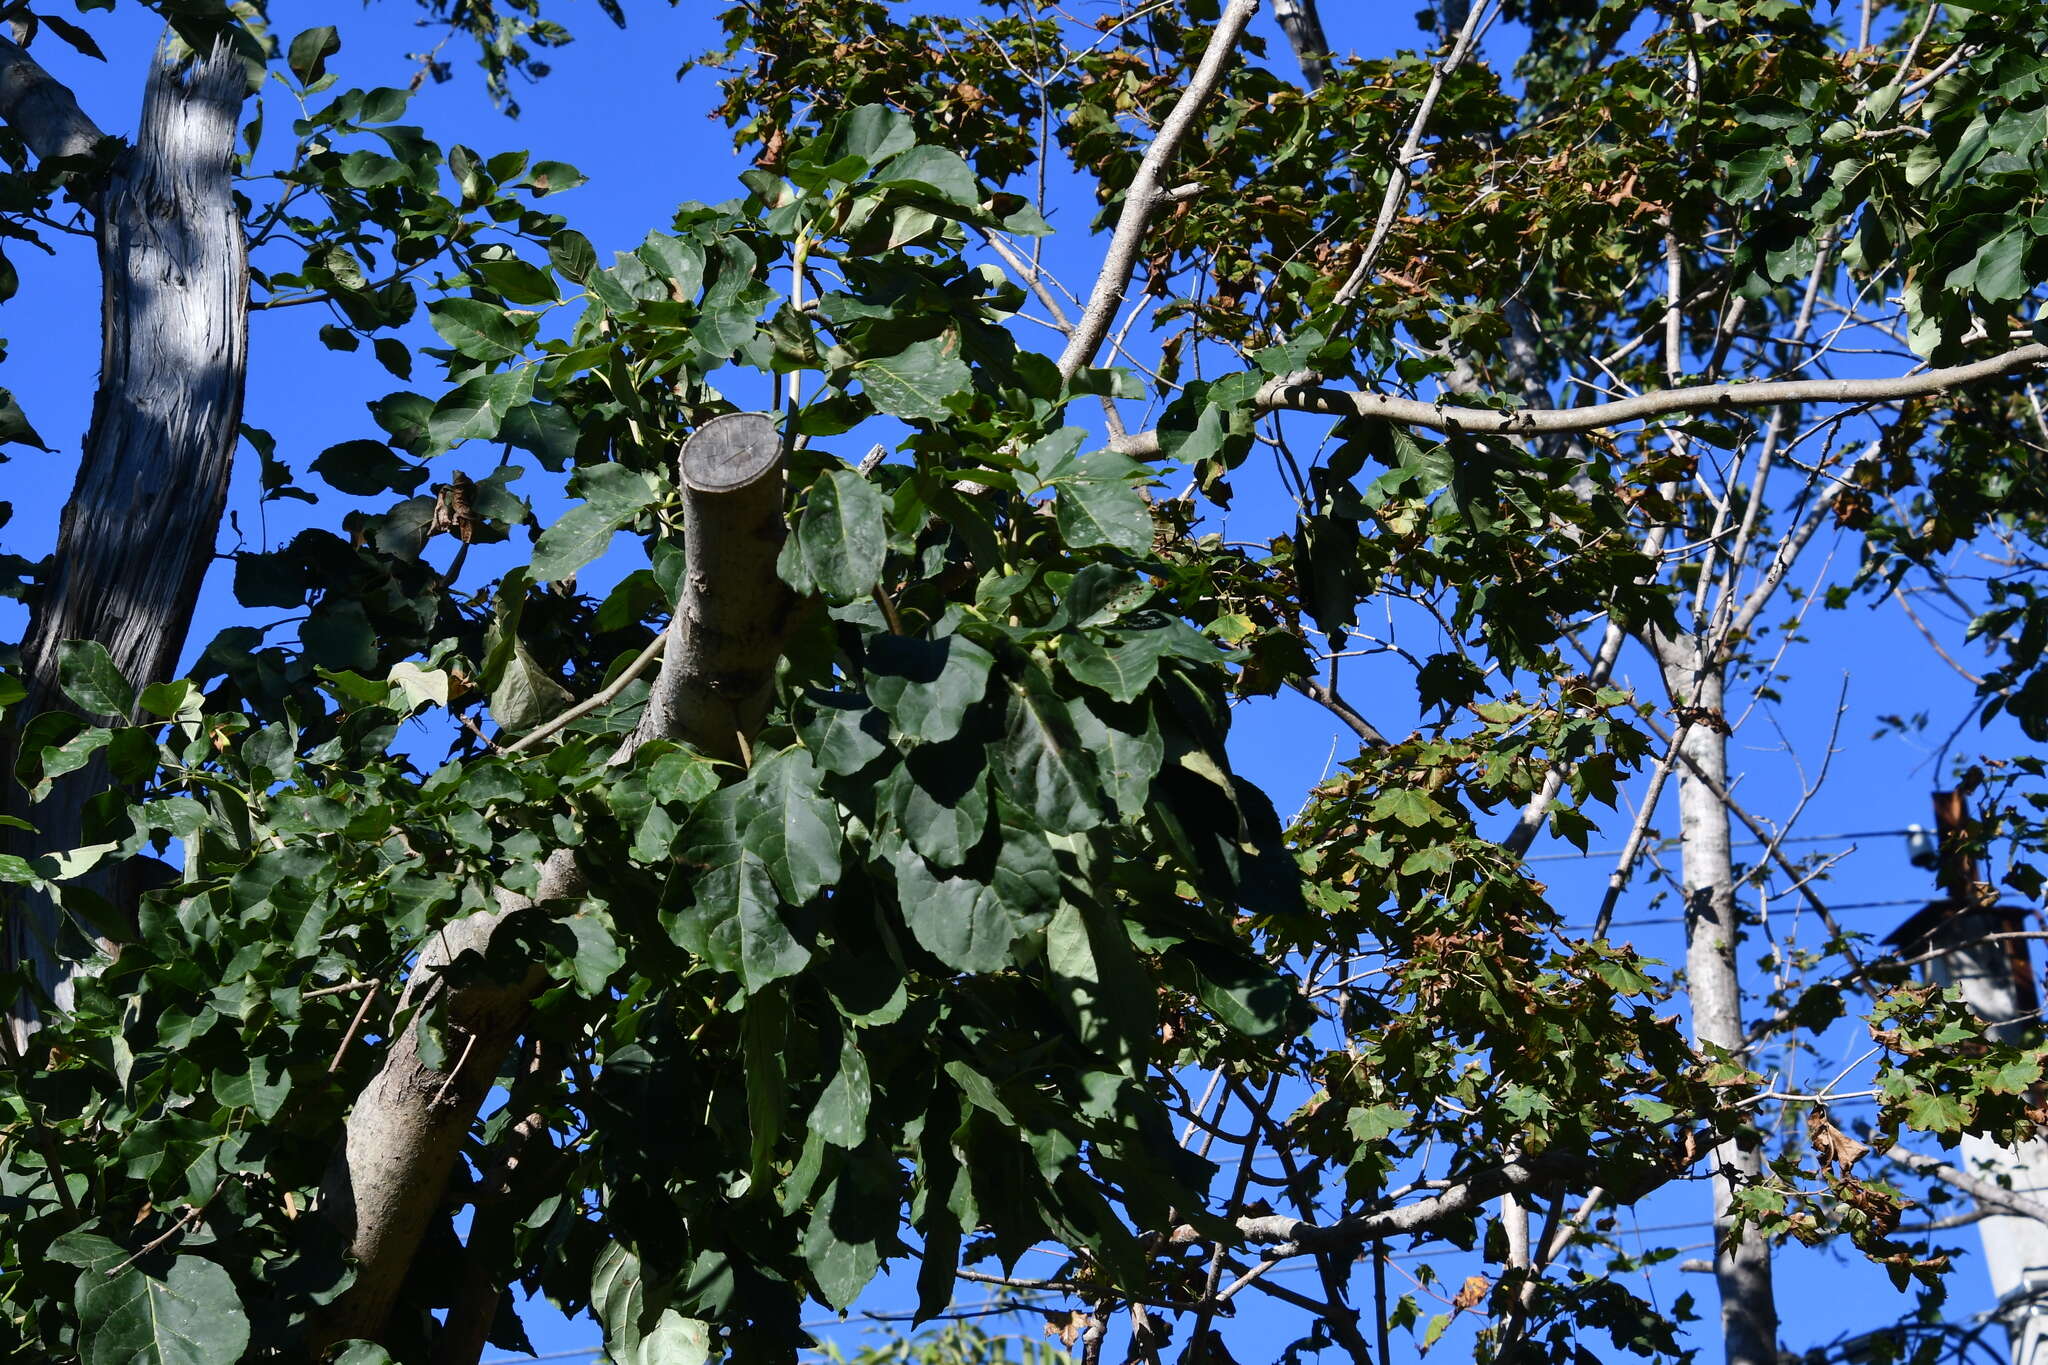 Image of Fraxinus chinensis subsp. rhynchophylla (Hance) A. E. Murray